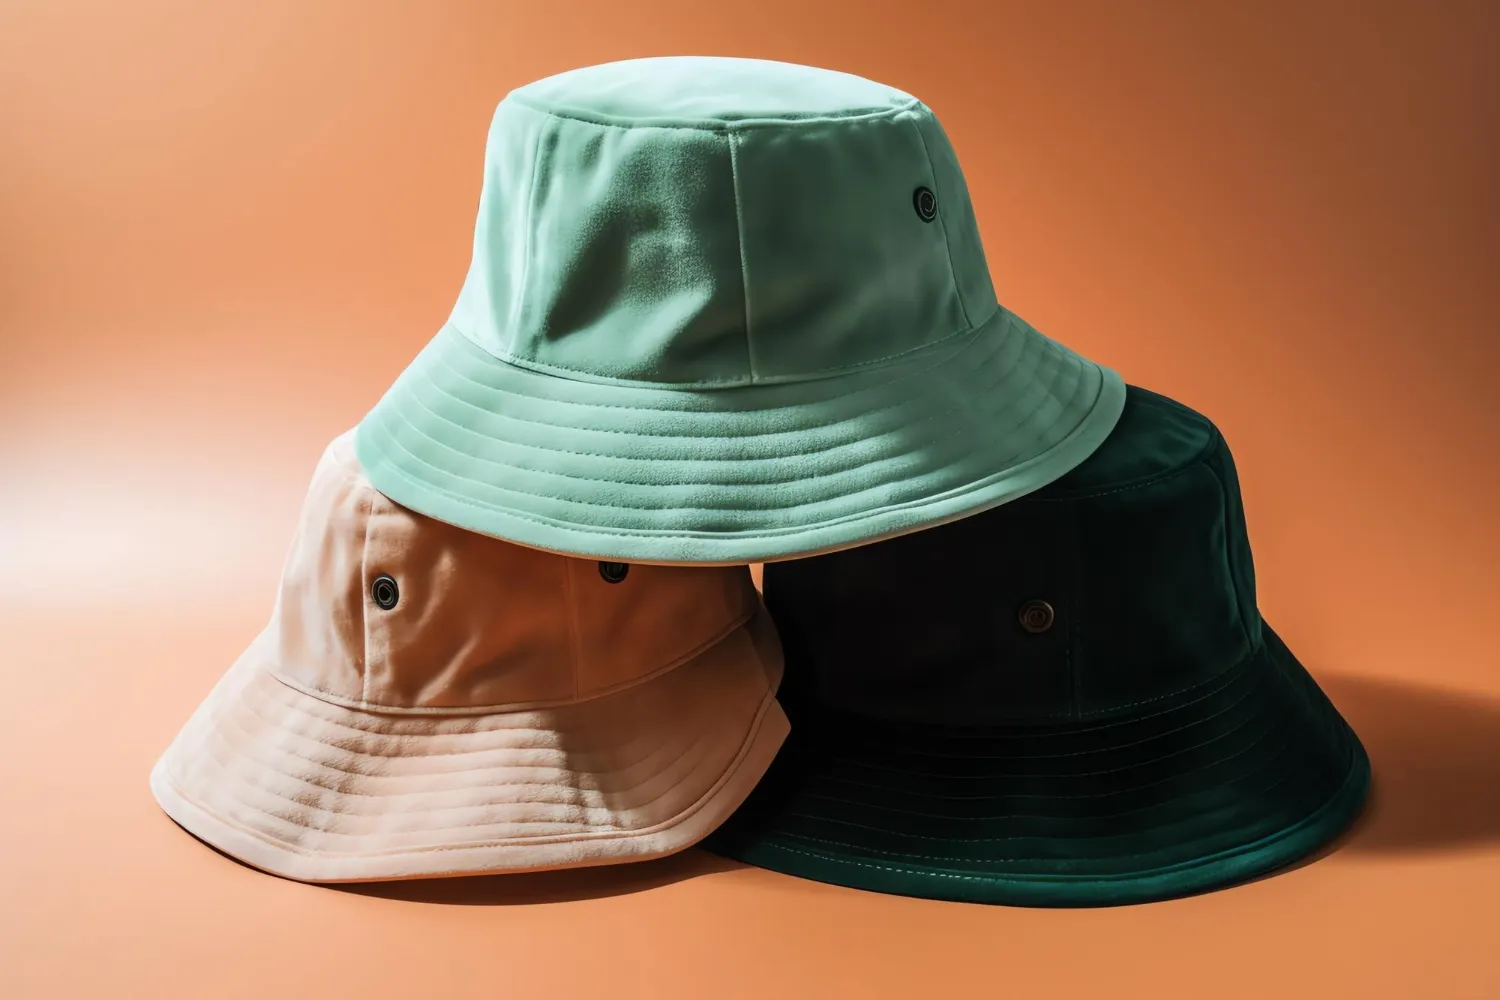 Three green bucket hats are stacked on top of each other